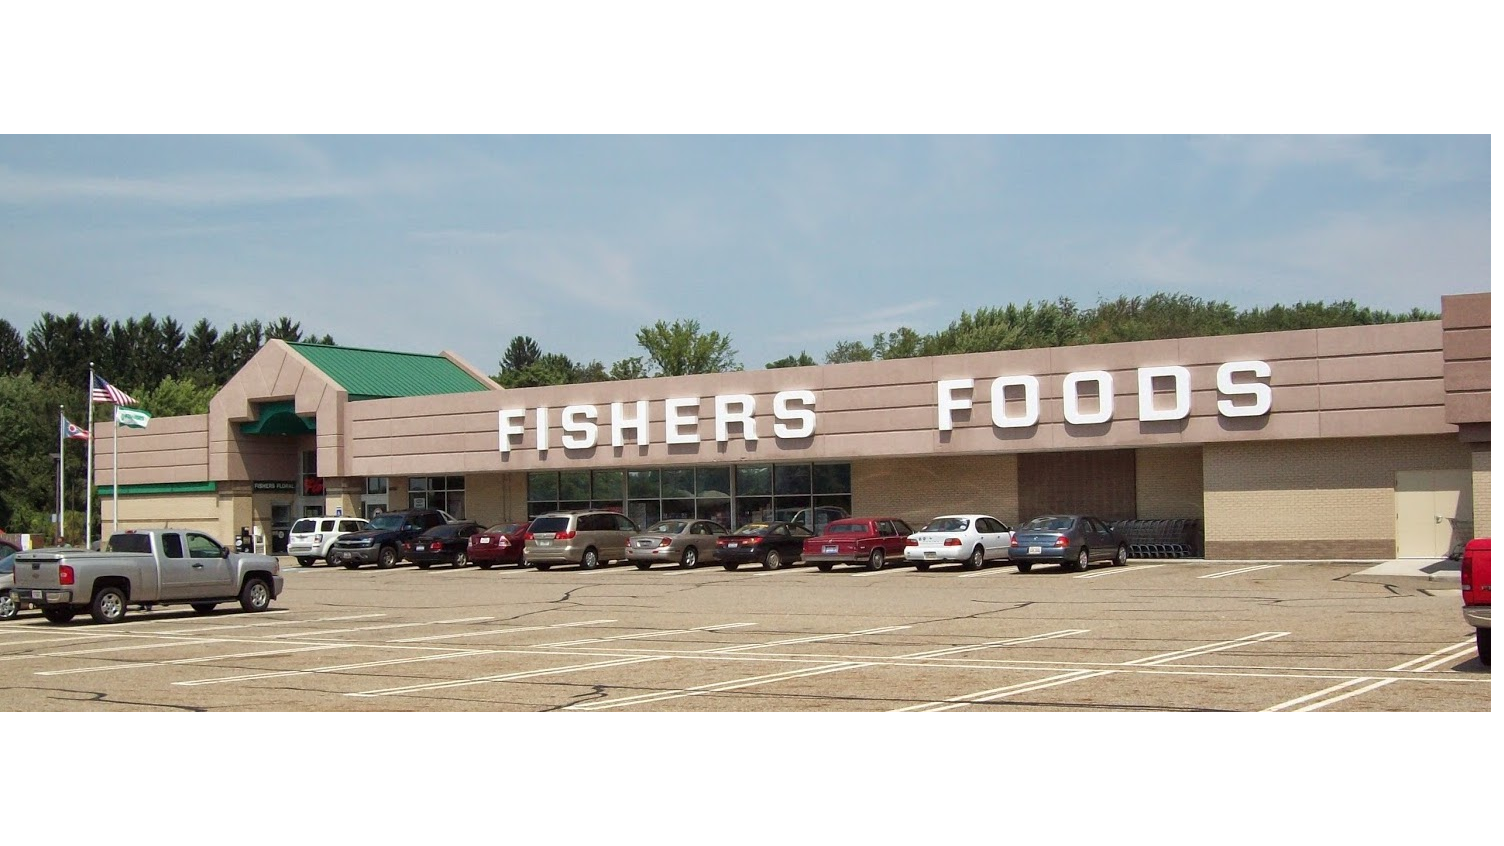 Fishers Foods